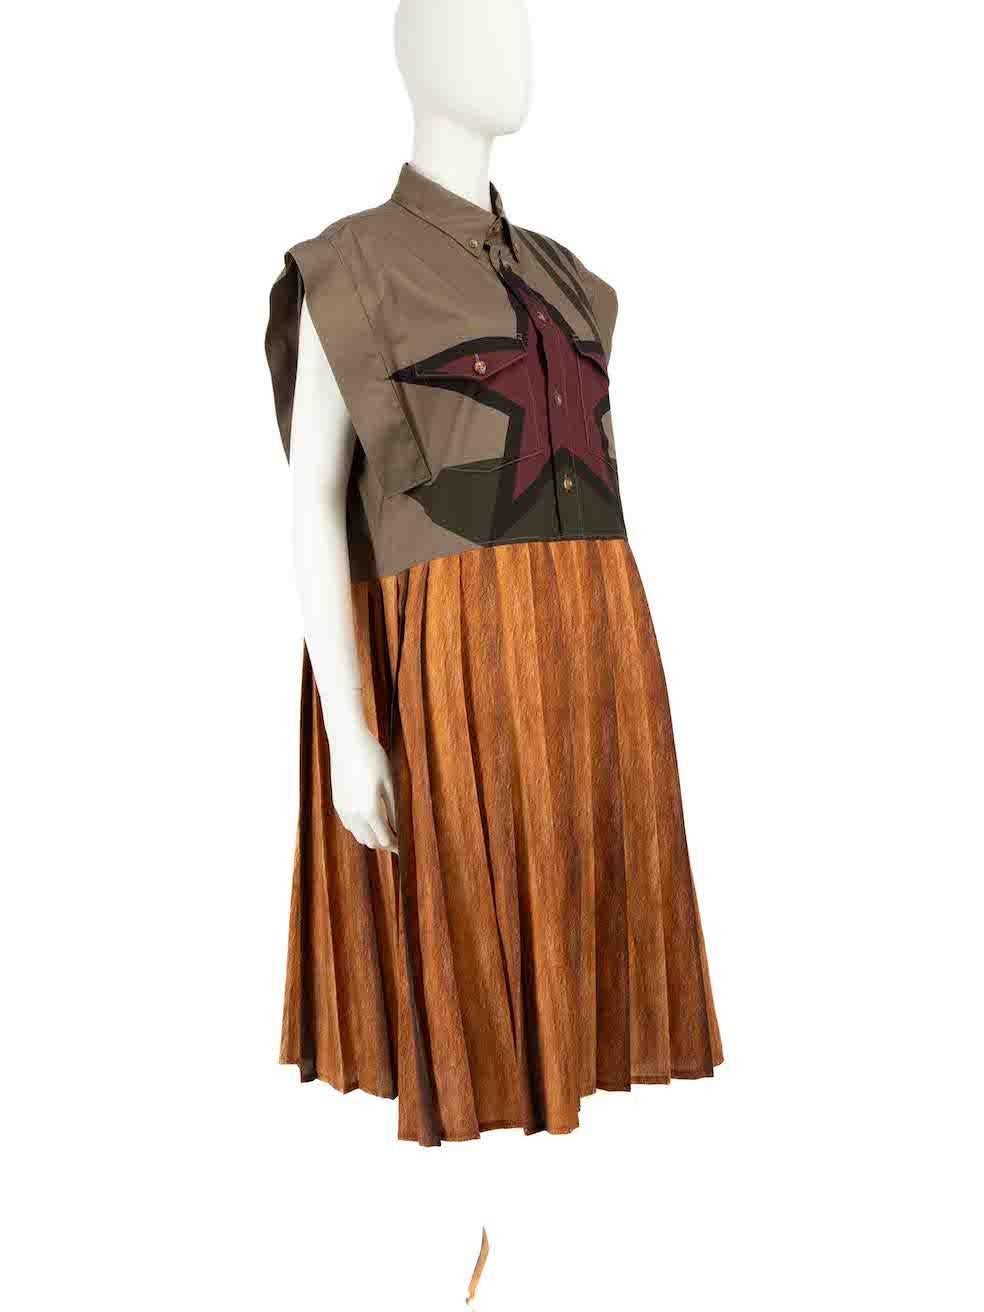 CONDITION is Never worn, with tags. No visible wear to dress is evident on this new Burberry designer resale item.
 
 
 
 Details
 
 
 Multicolour- khaki, brown
 
 Cotton
 
 Dress
 
 Star print
 
 Pleated skirt
 
 Short sleeves
 
 Button up